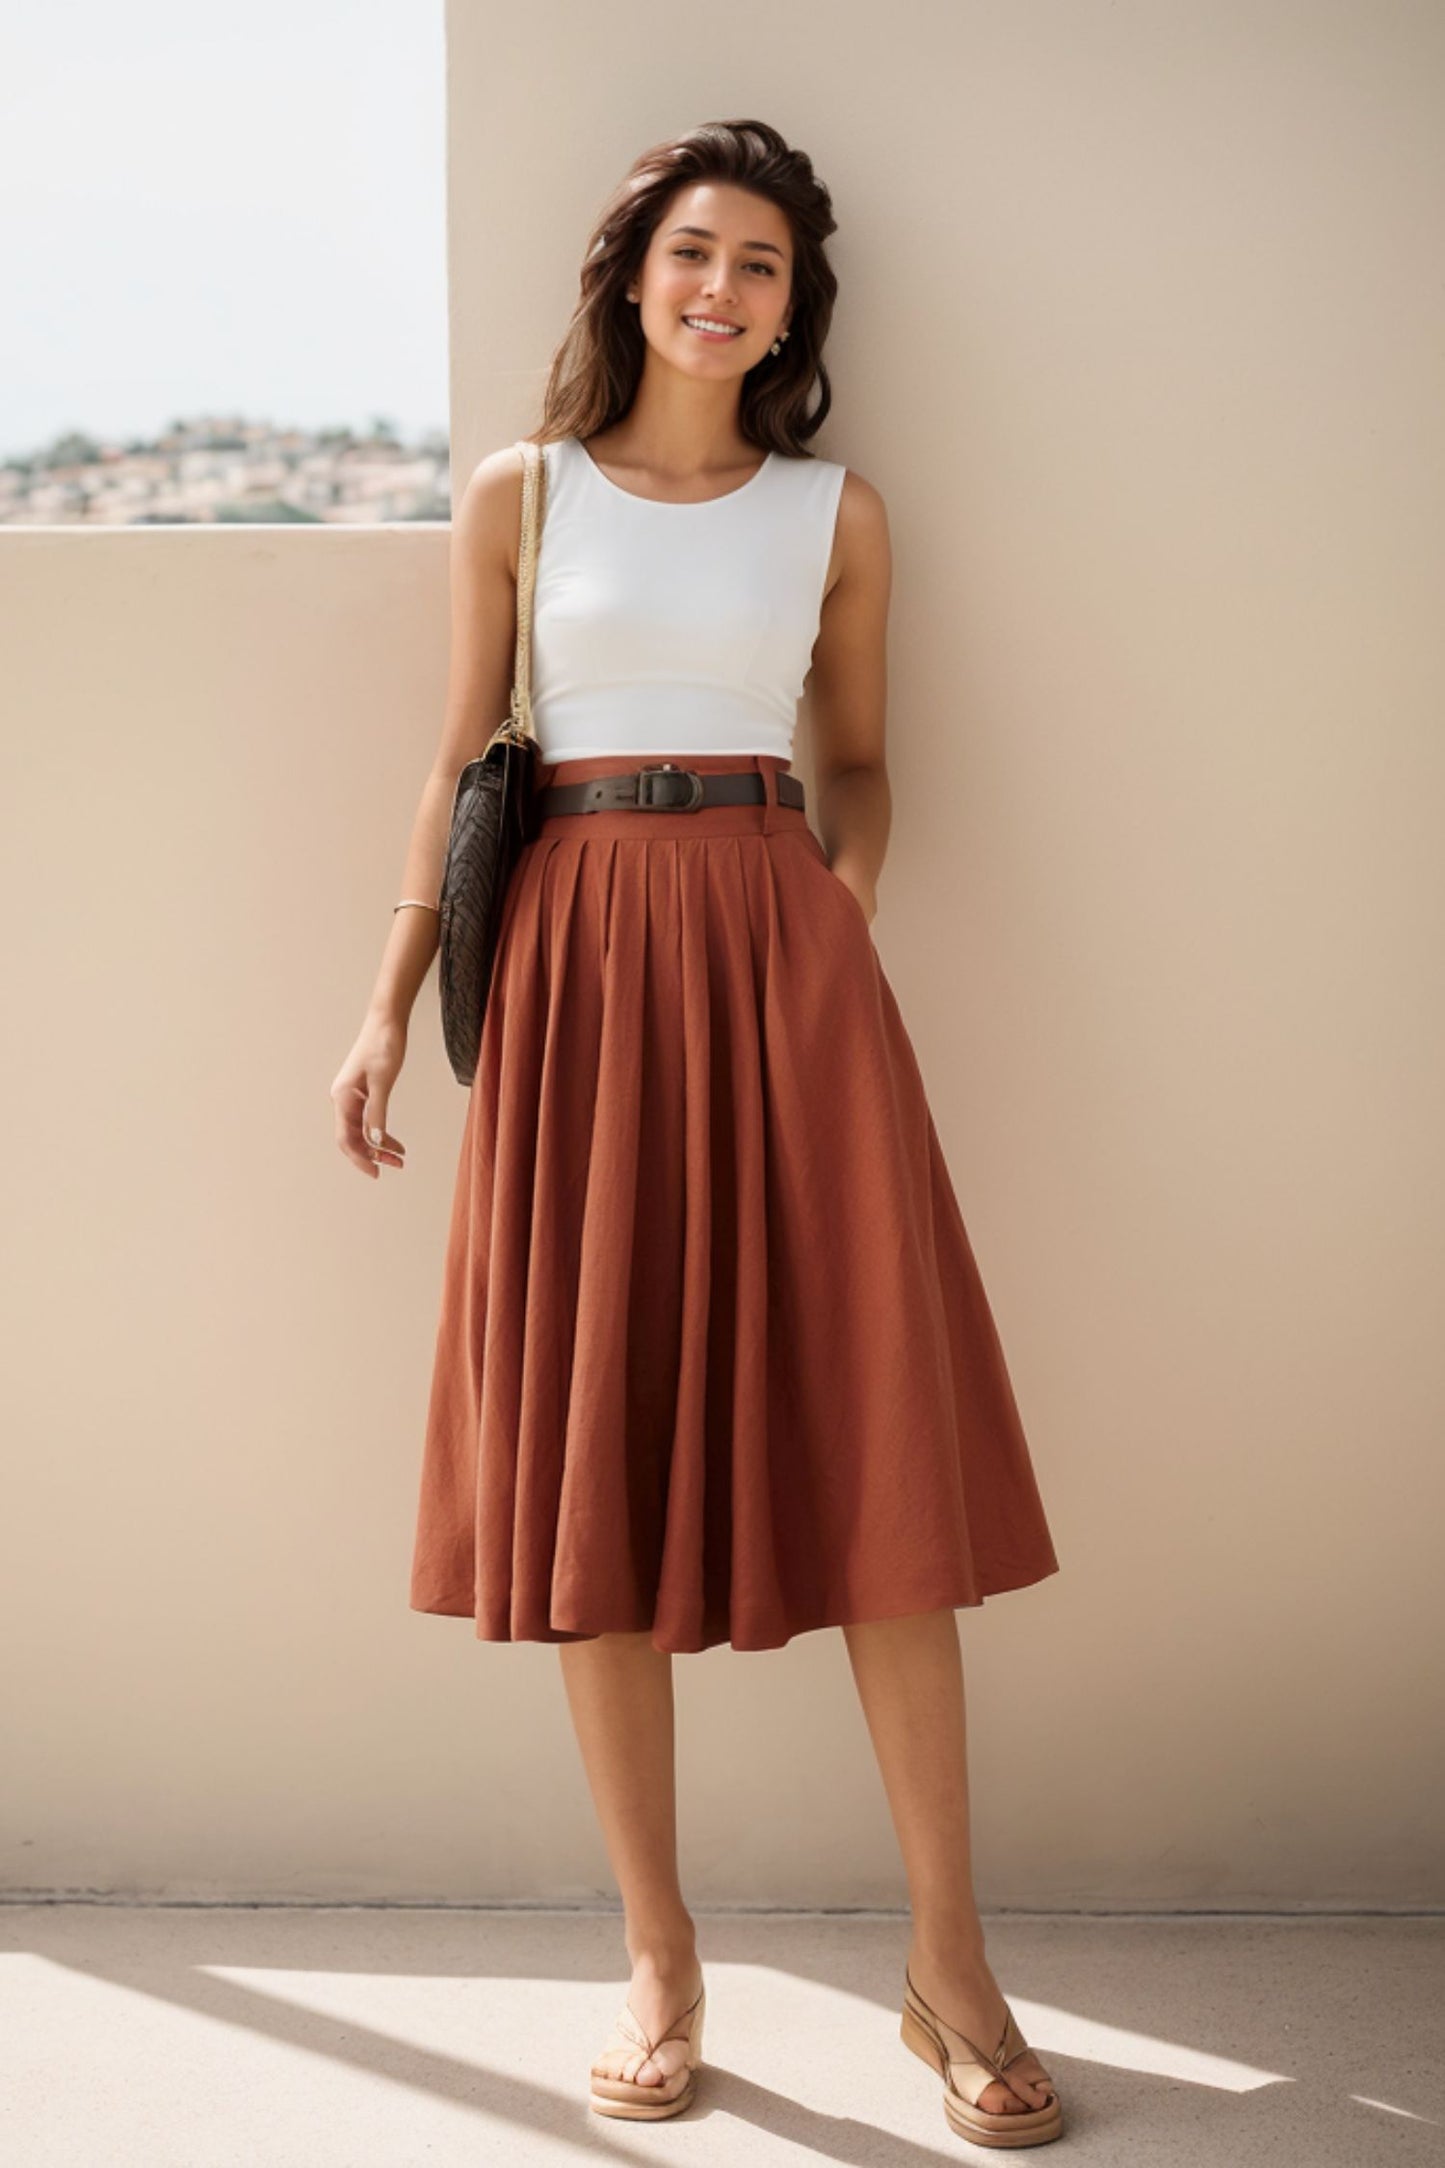 Linen Full Circle Skirt with Pockets 4976